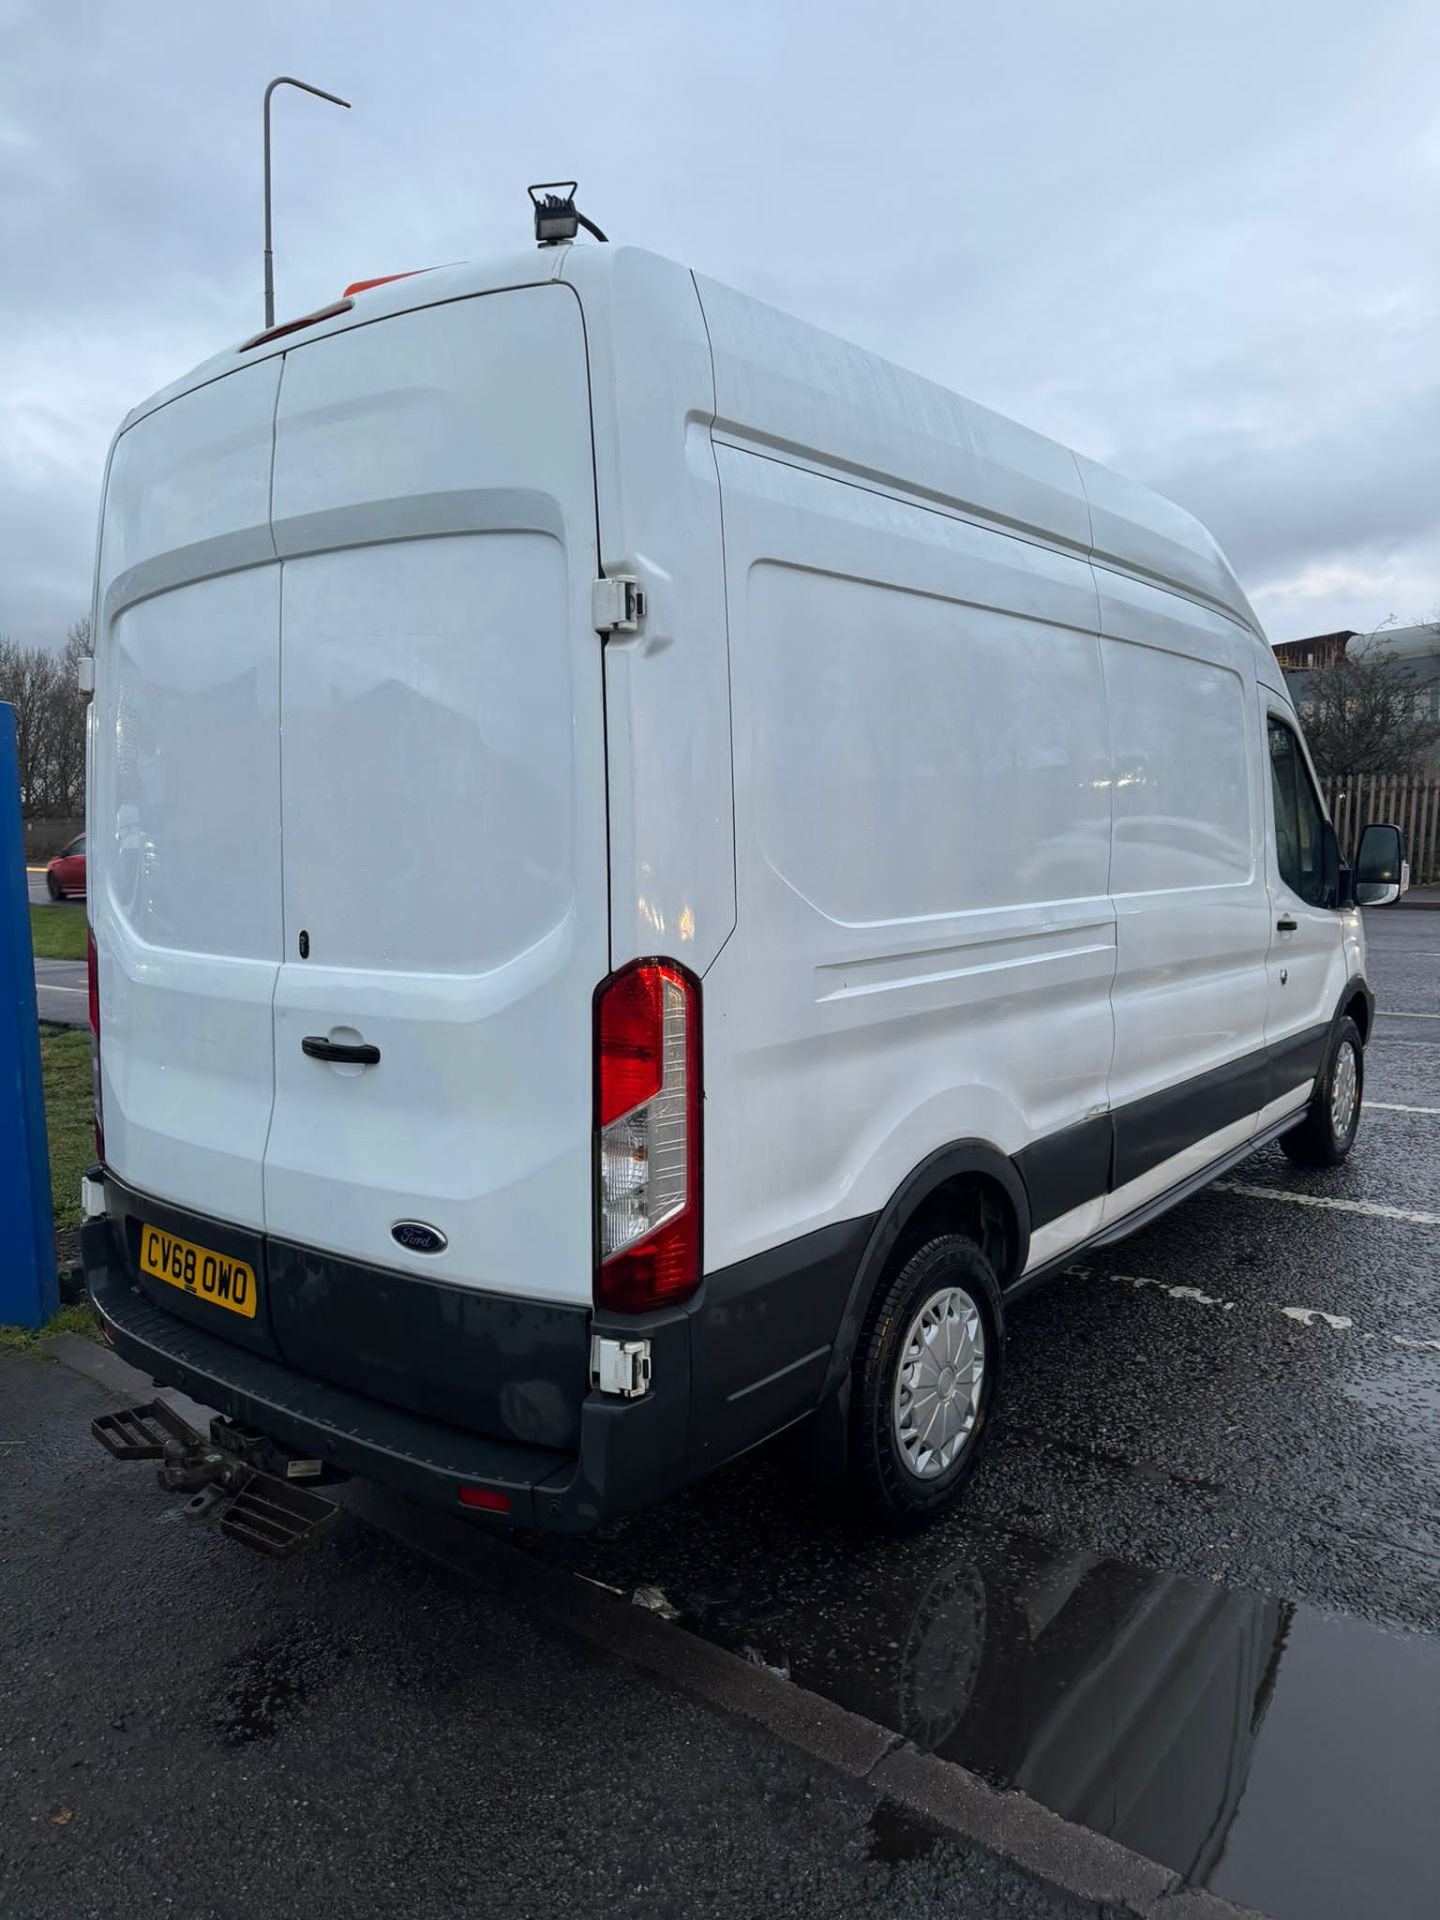 2018 68 FORD TRANSIT 350 PANEL VAN - RWD - EURO 6 - PLY LINED - 98k MILES - Image 7 of 11